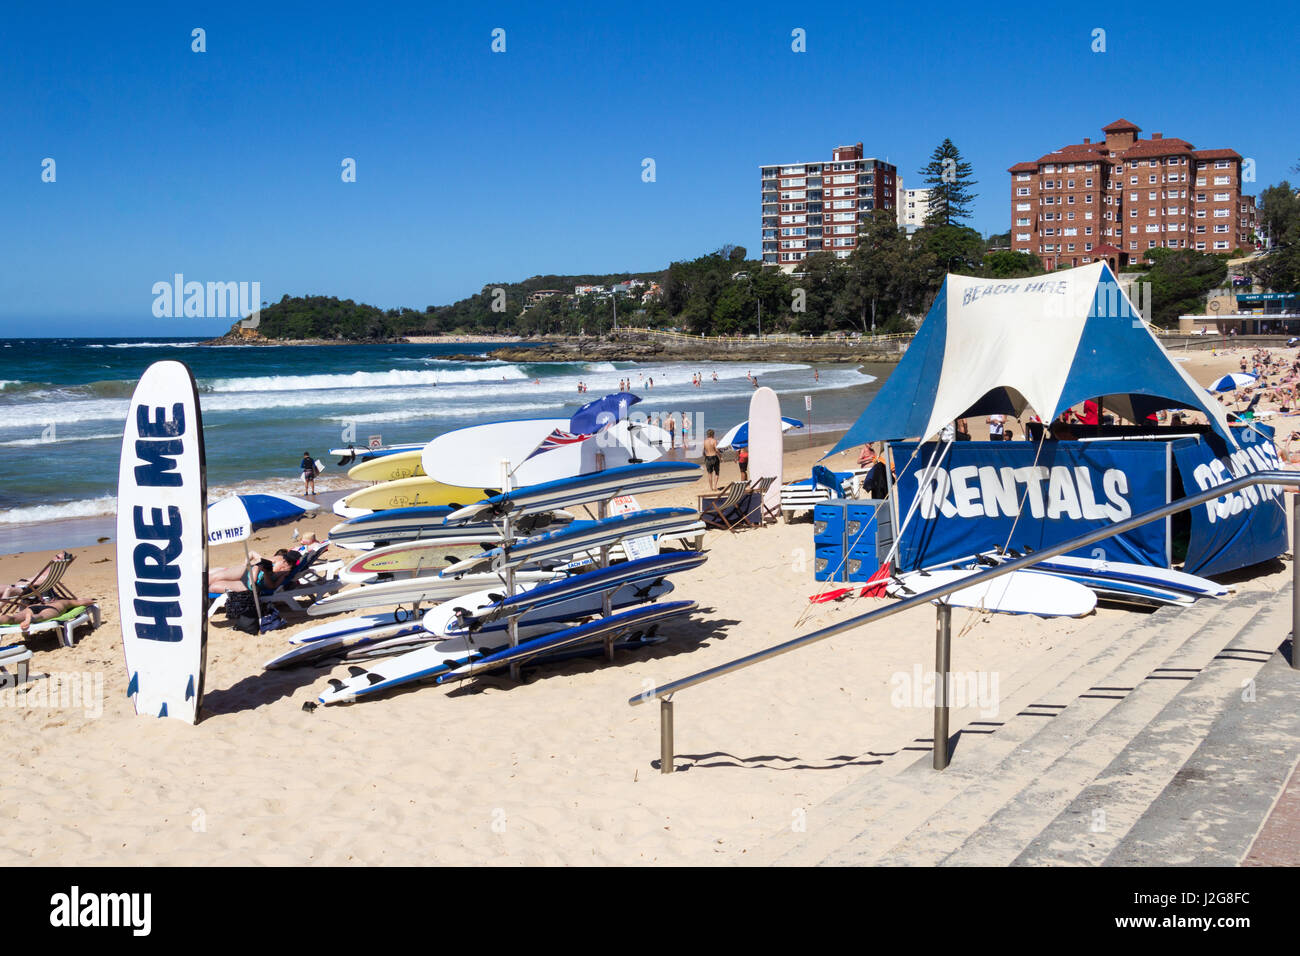 Surfboards for hire on Manly beach, Sydney, Australia Stock Photo